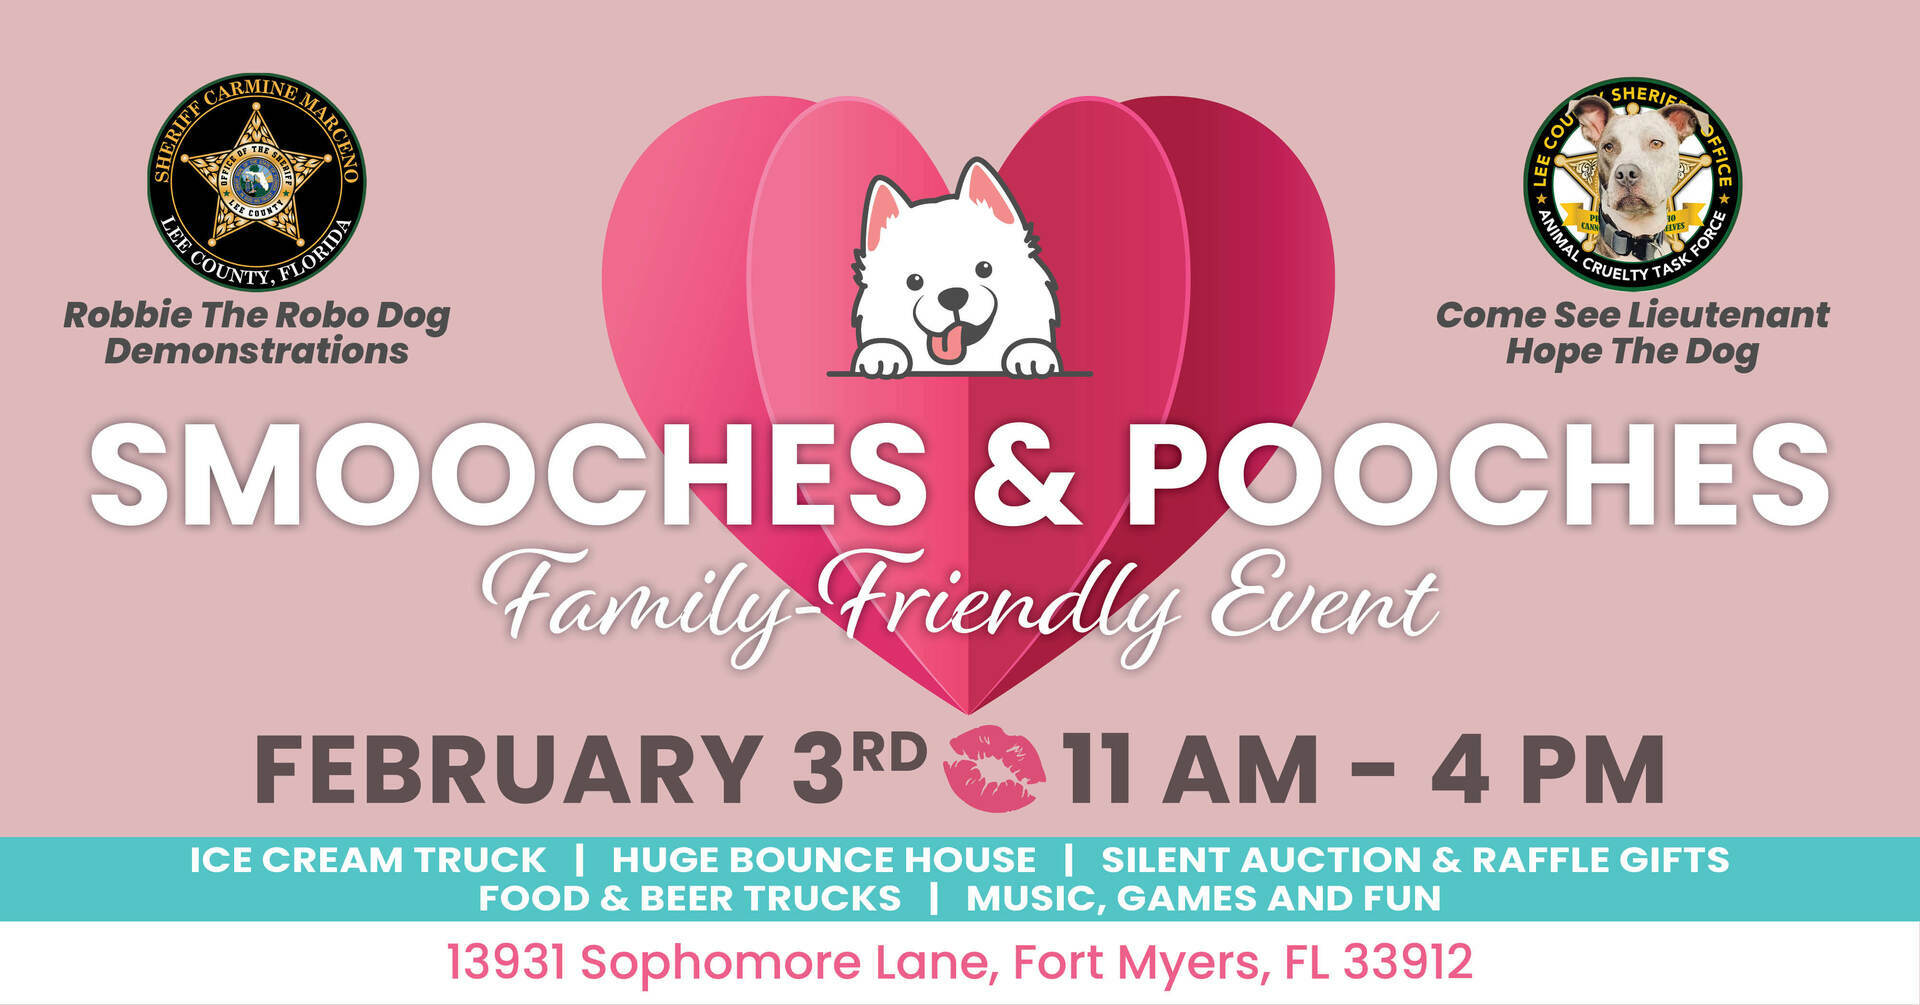 Smooches and Pooches - FREE, Family Fun Event - February 3 11AM to 4PM 13931 Sophomore Lane Ft Myers, Fort Myers, Florida, United States